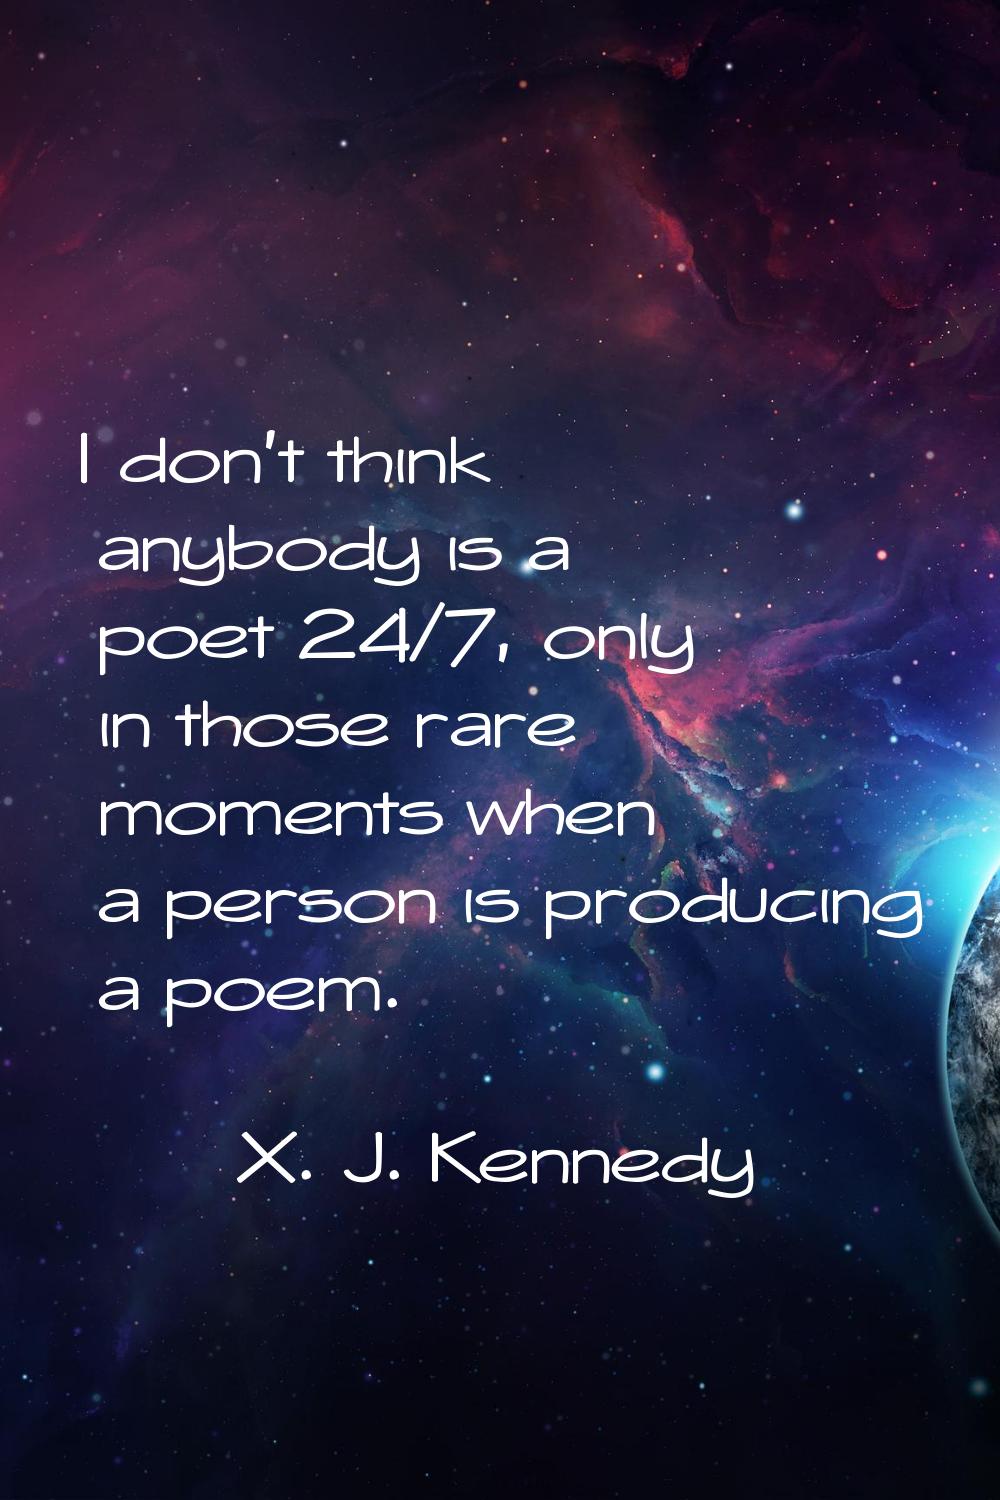 I don't think anybody is a poet 24/7, only in those rare moments when a person is producing a poem.